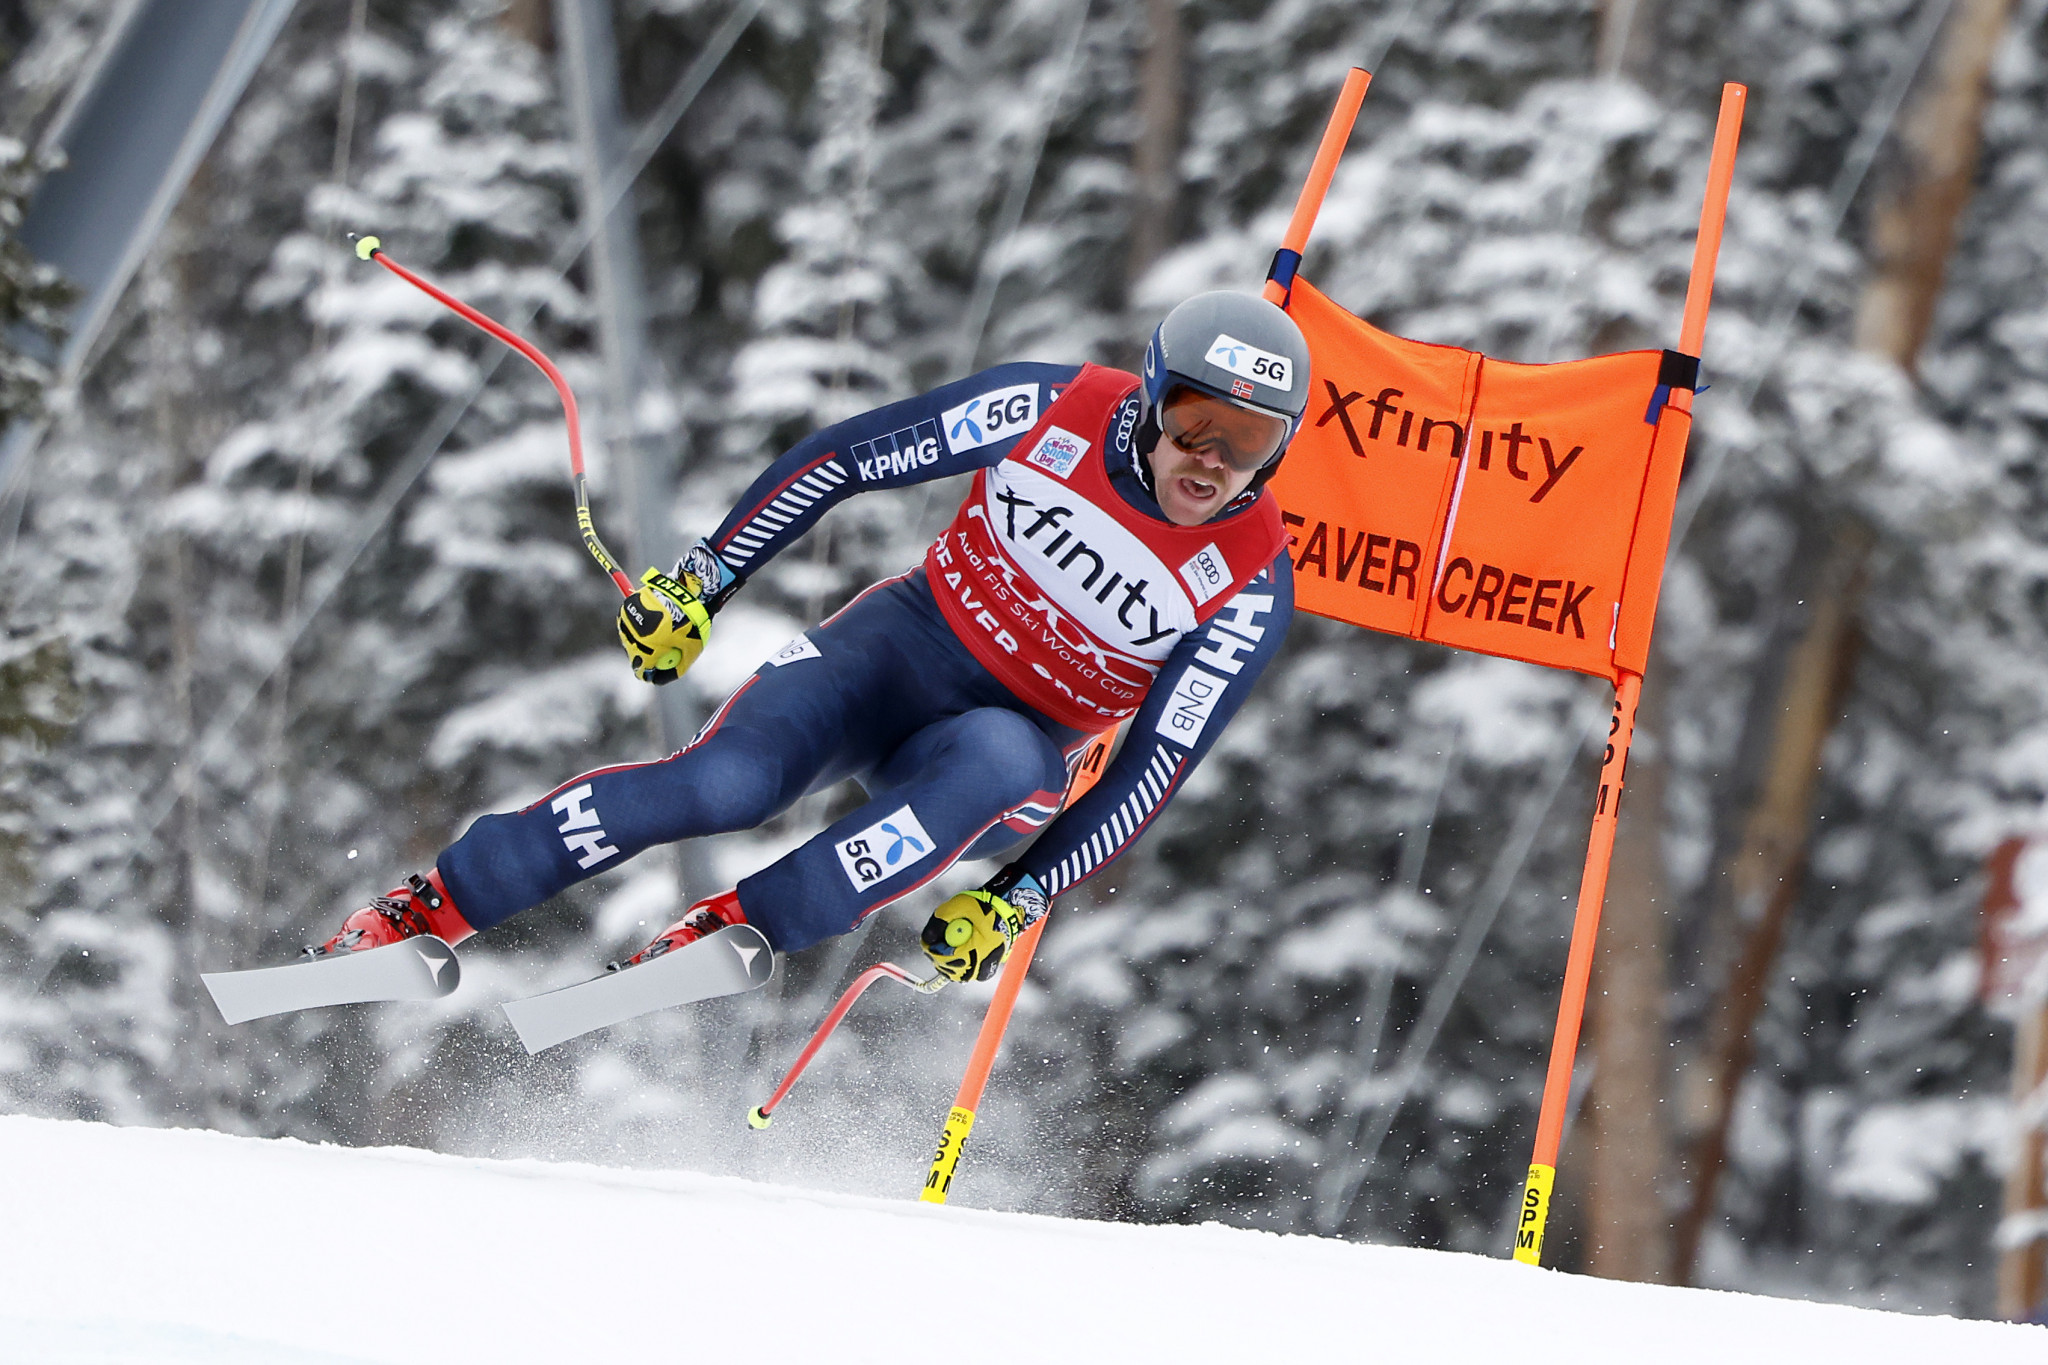 Kilde claims another downhill victory at Alpine Ski World Cup in Beaver Creek